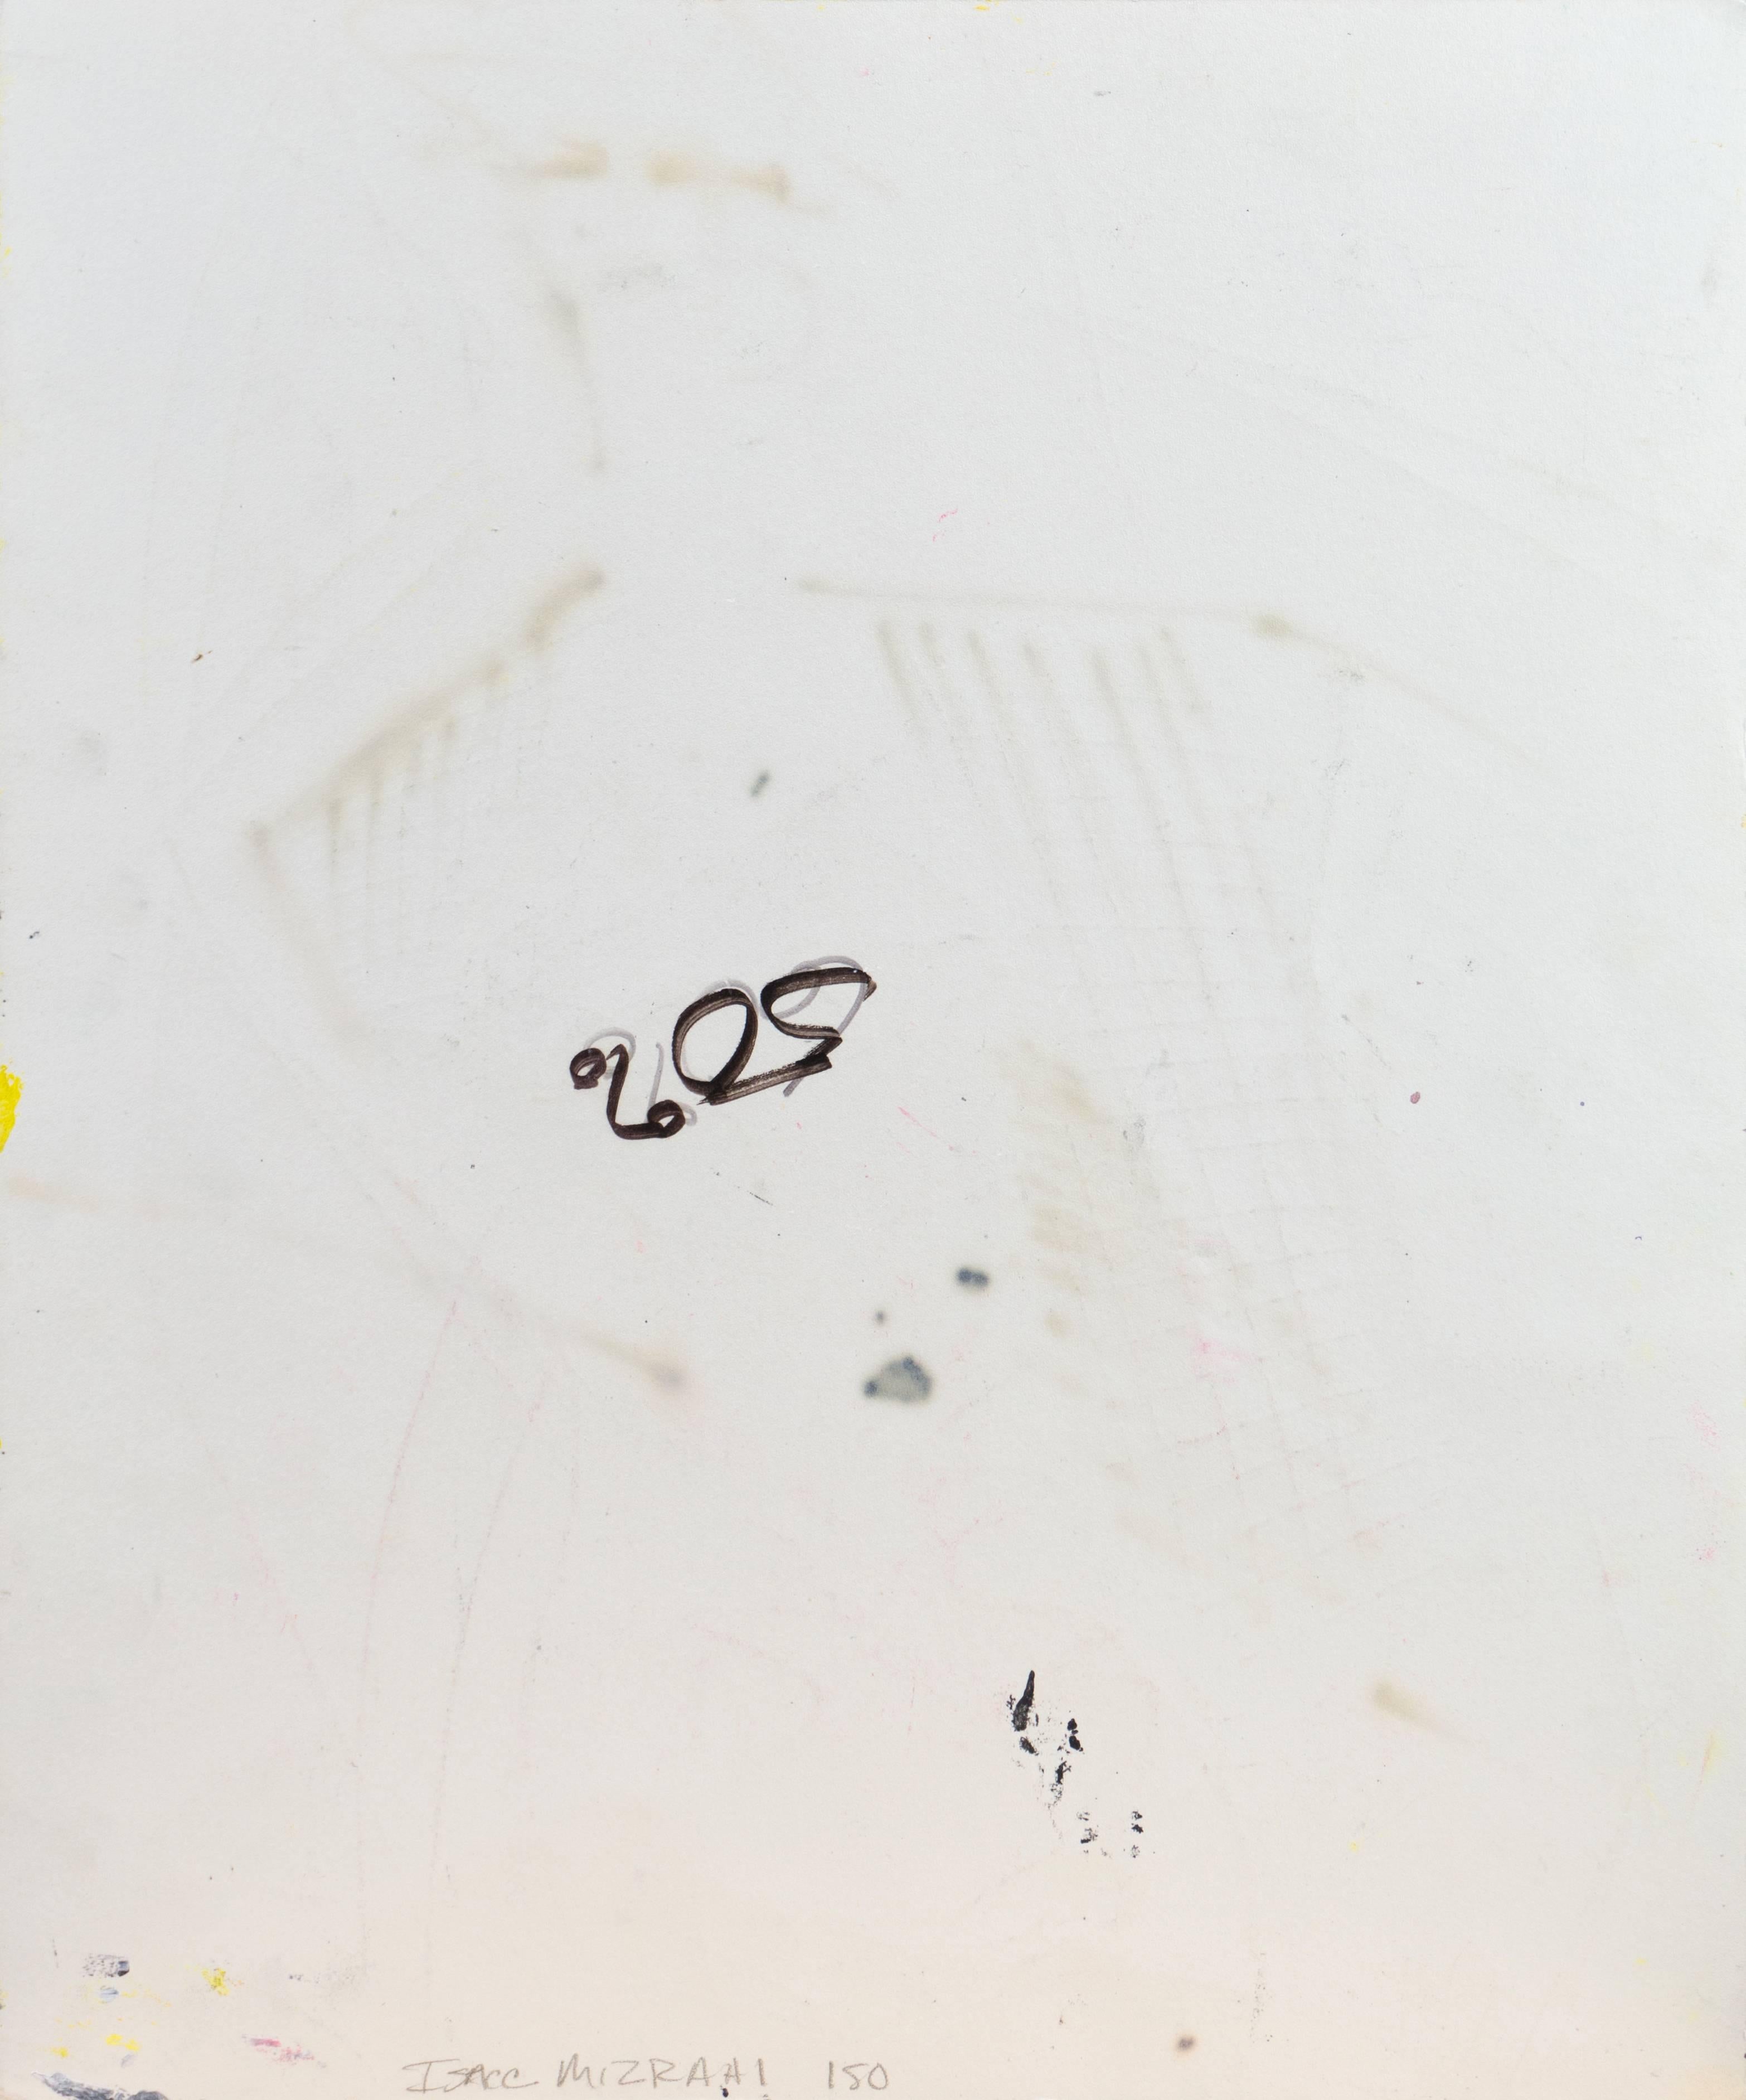 Initialed 'M' lower right and dated 1991; additionally signed verso lower left, 'Isaac Mizrahi'.

A notable fashion designer and creator of costume, Isaac Mizrahi attended the Parsons School of Design before becoming a designer of haute couture.